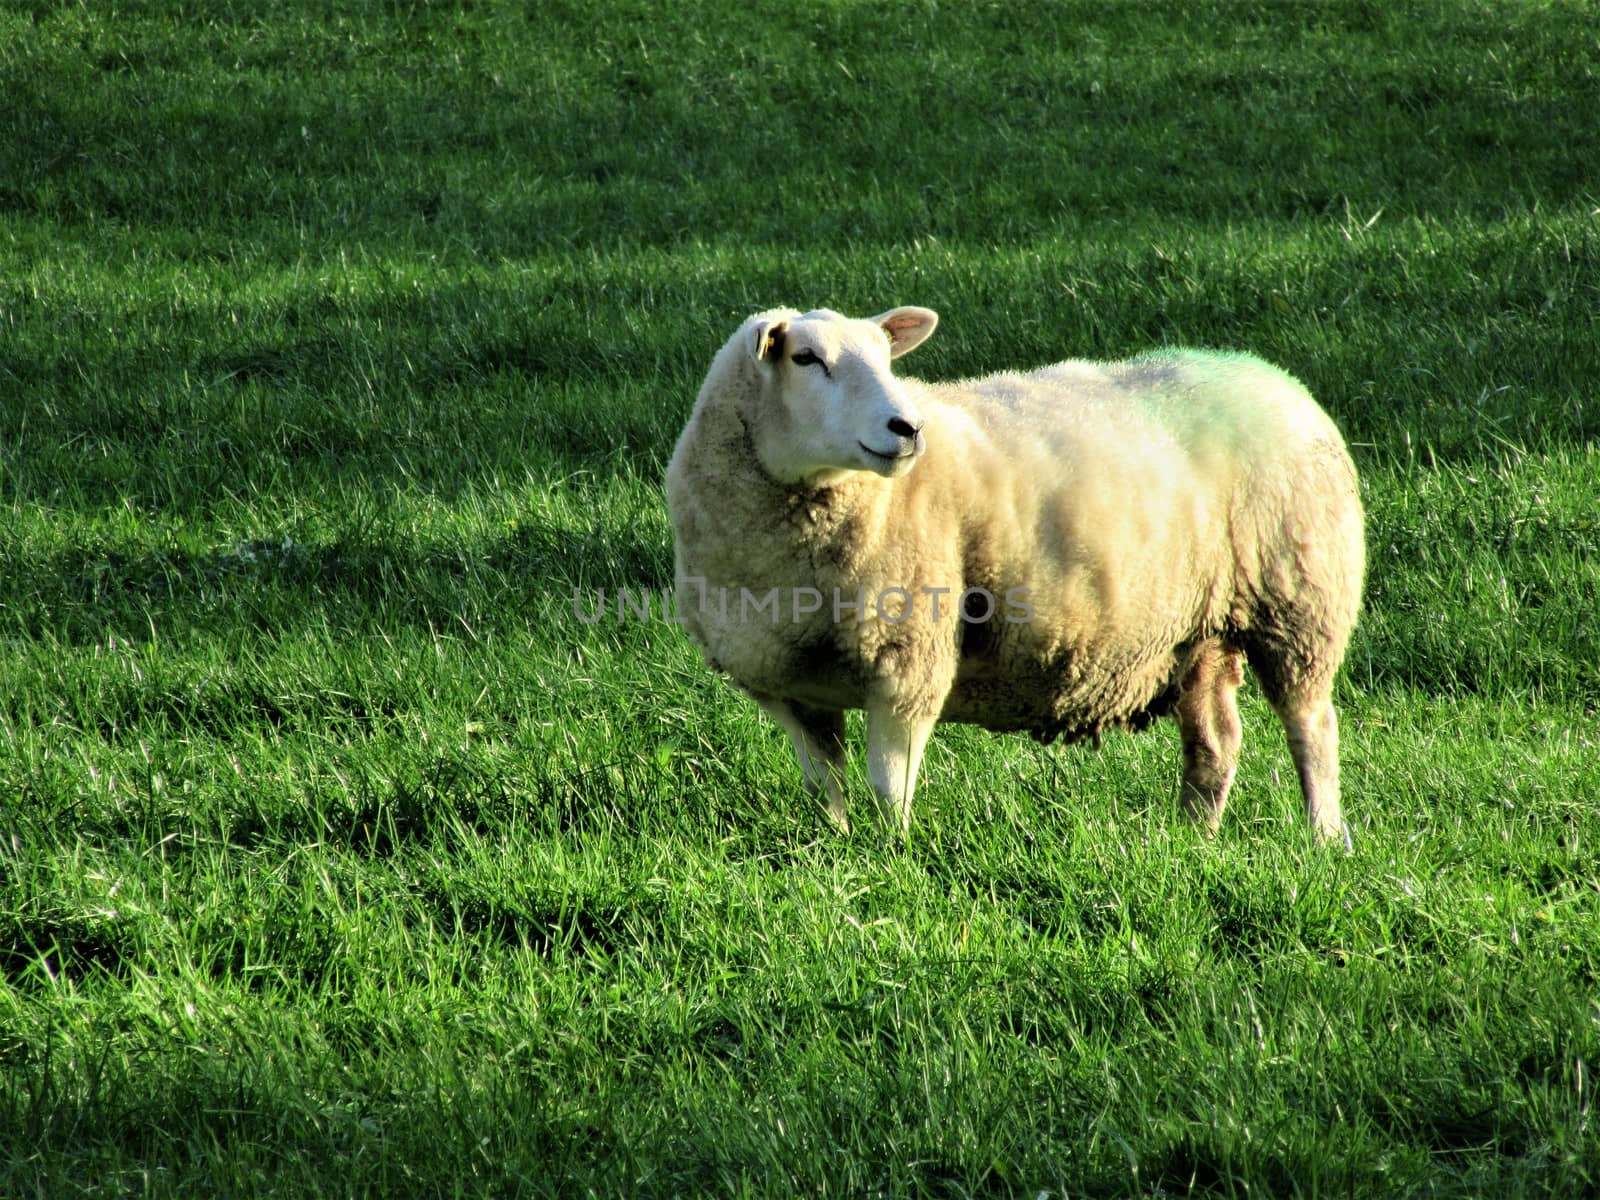 One sheep standing on the green meadow looking around by Luise123